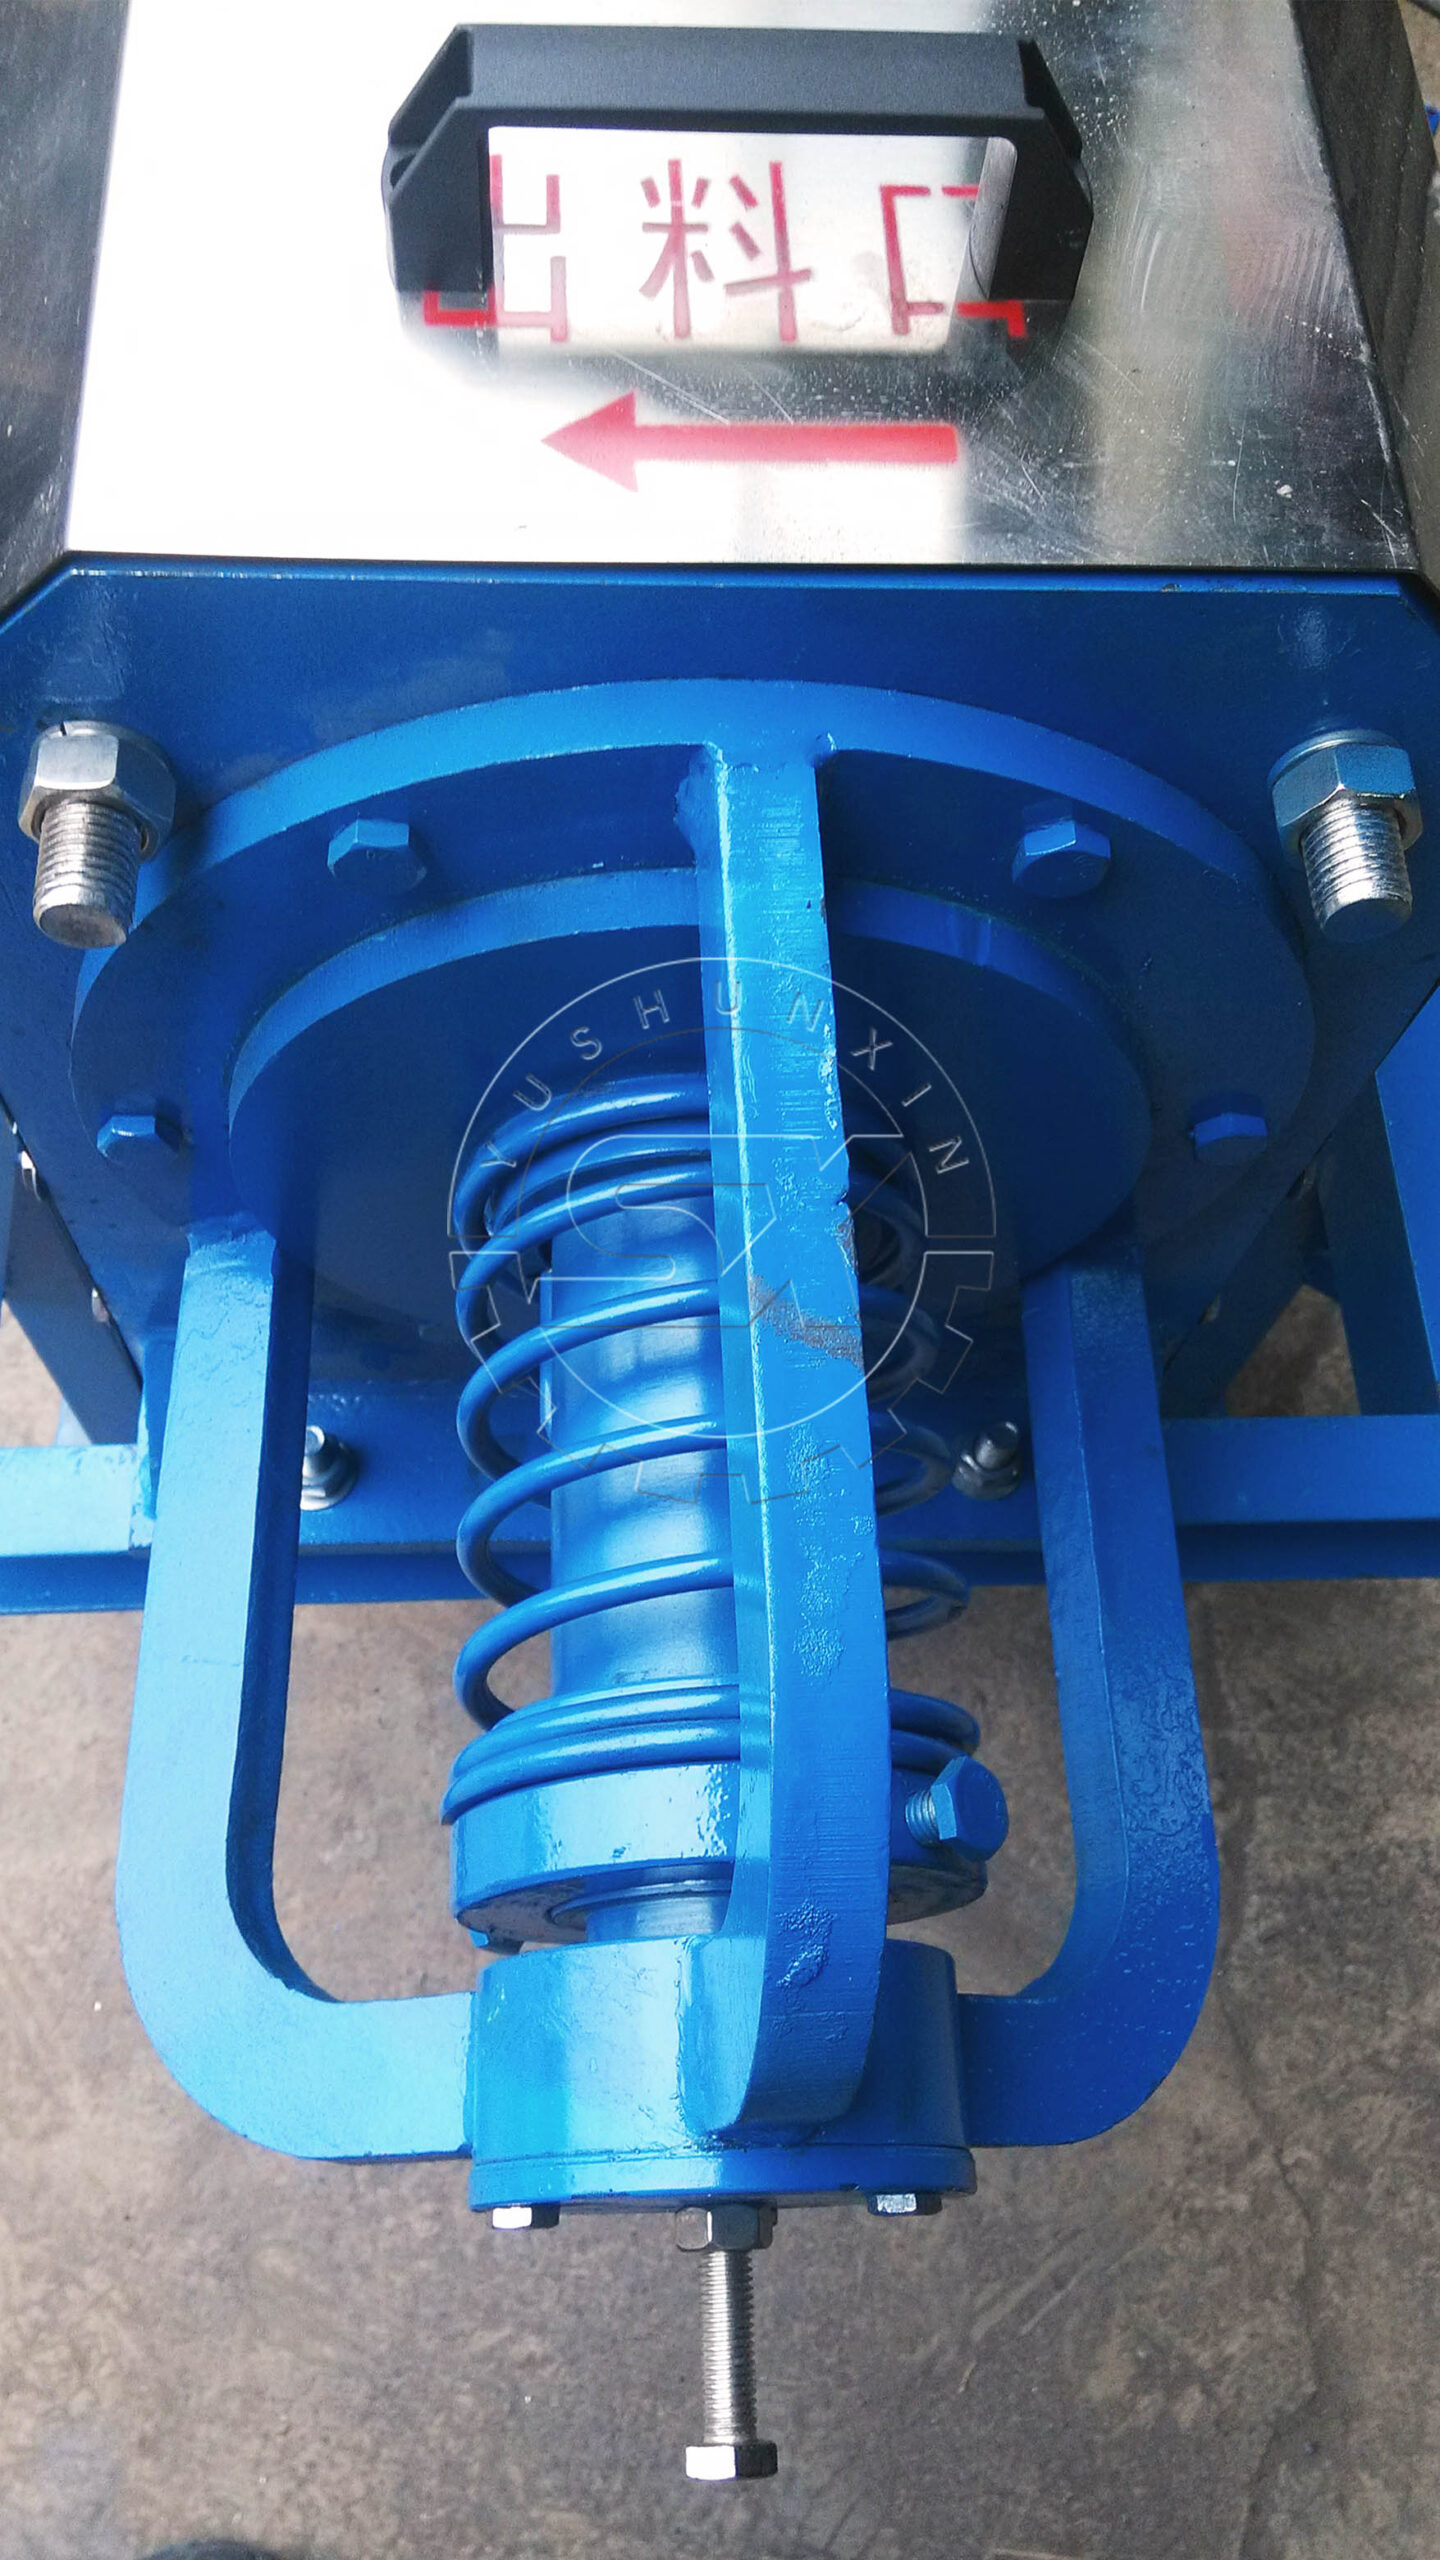 The Outlet of Dewatering Machine